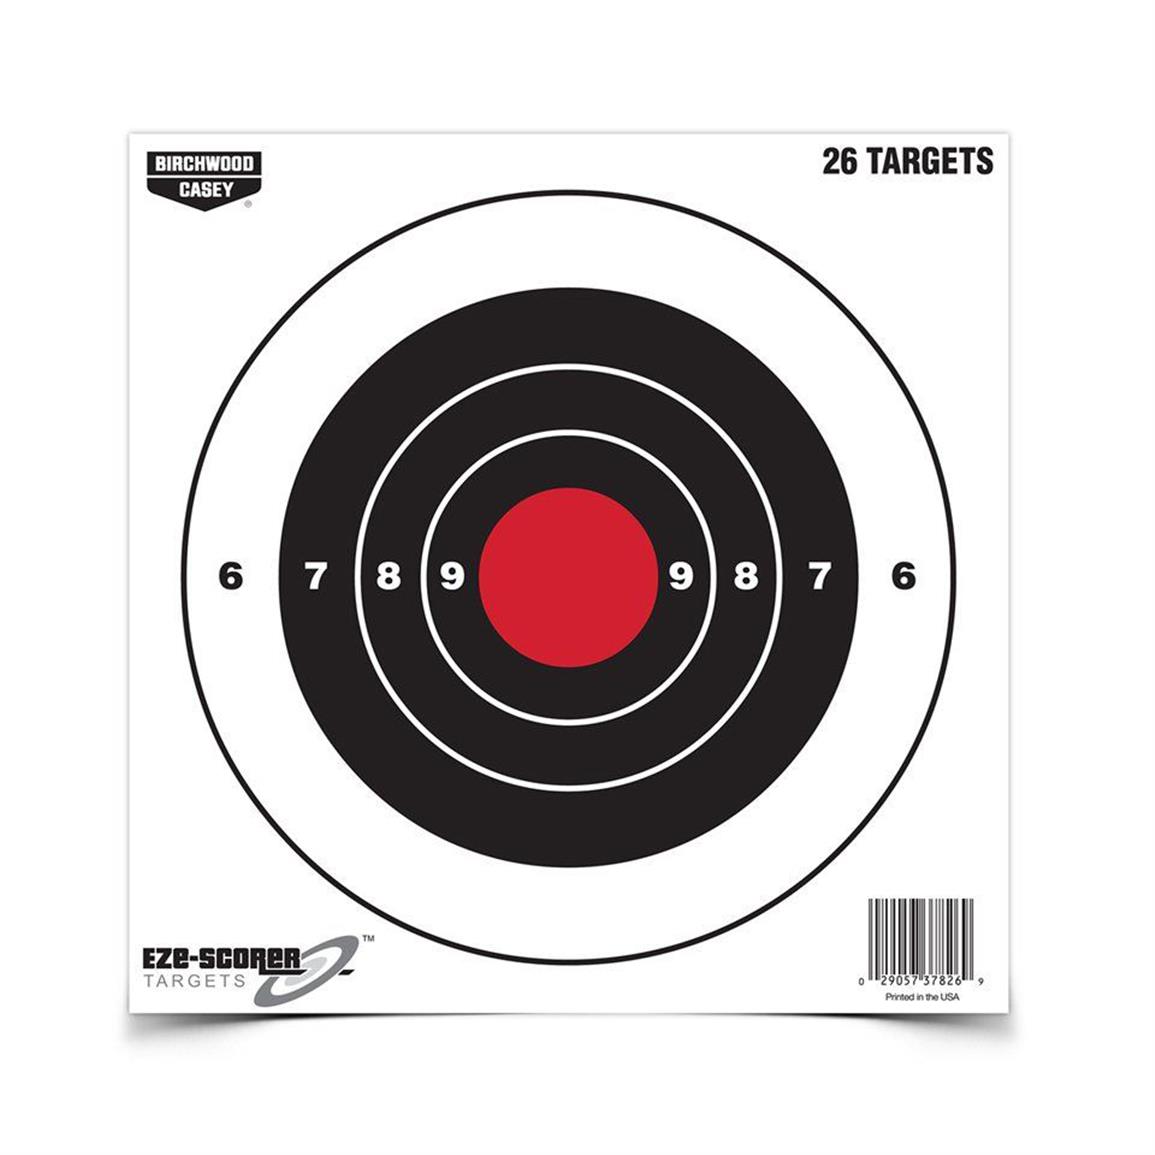 Dirty Bird 8" Round Paper Targets, 26 SheetPack 169515, Shooting Targets at Sportsman's Guide